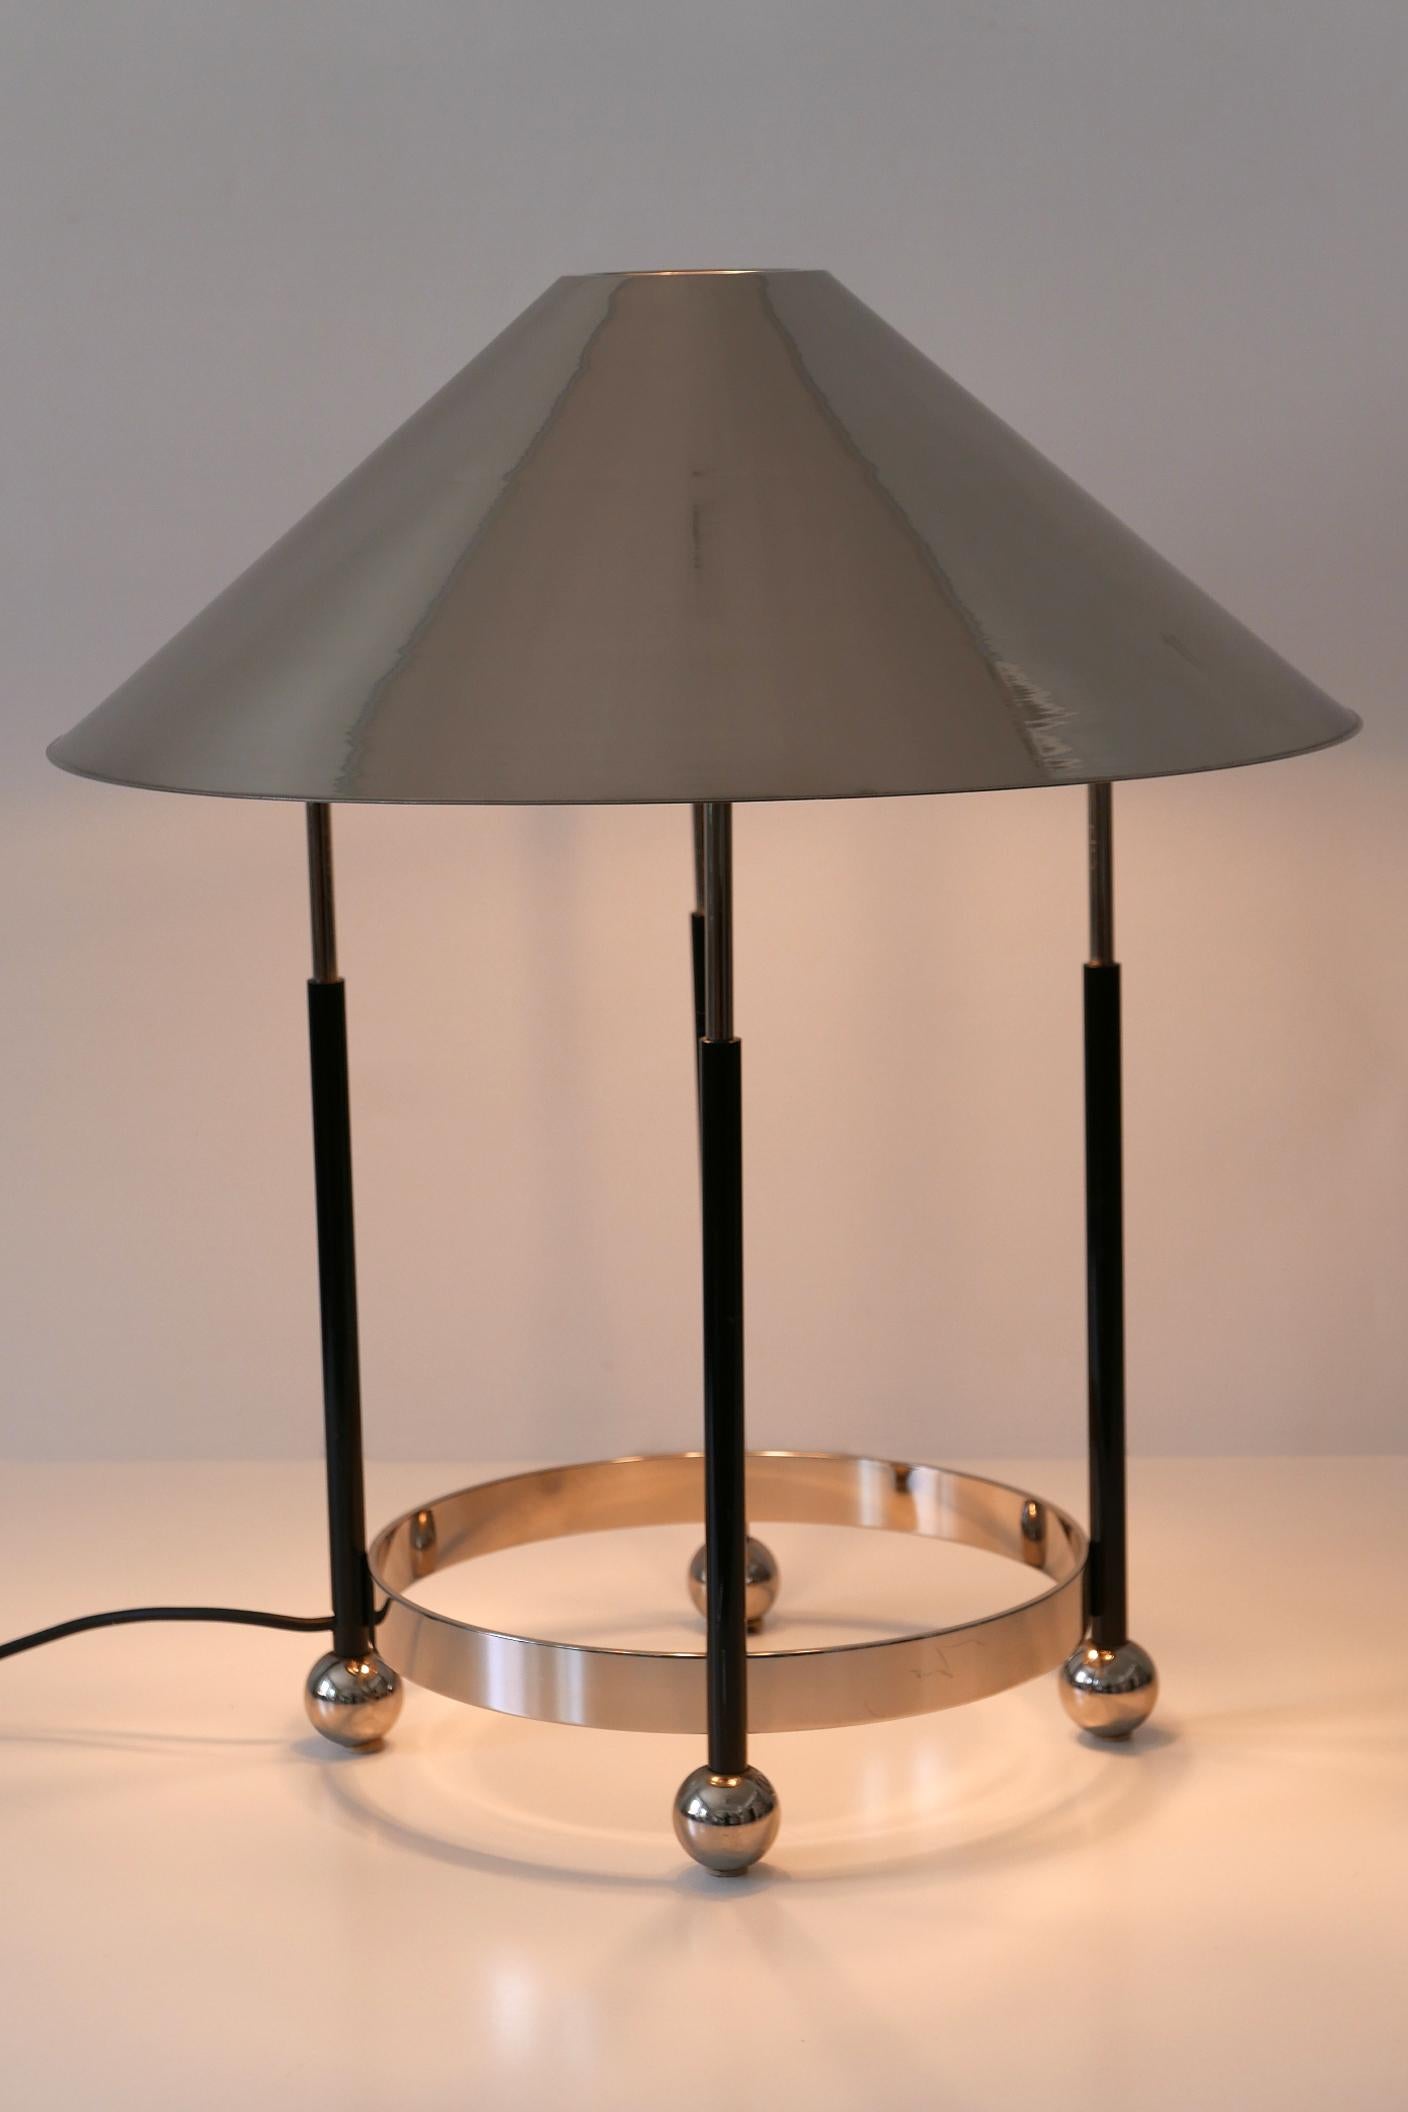 Monumental Mid-Century Modern Nickel-Plated Brass Table Lamp 1970s, Germany For Sale 10